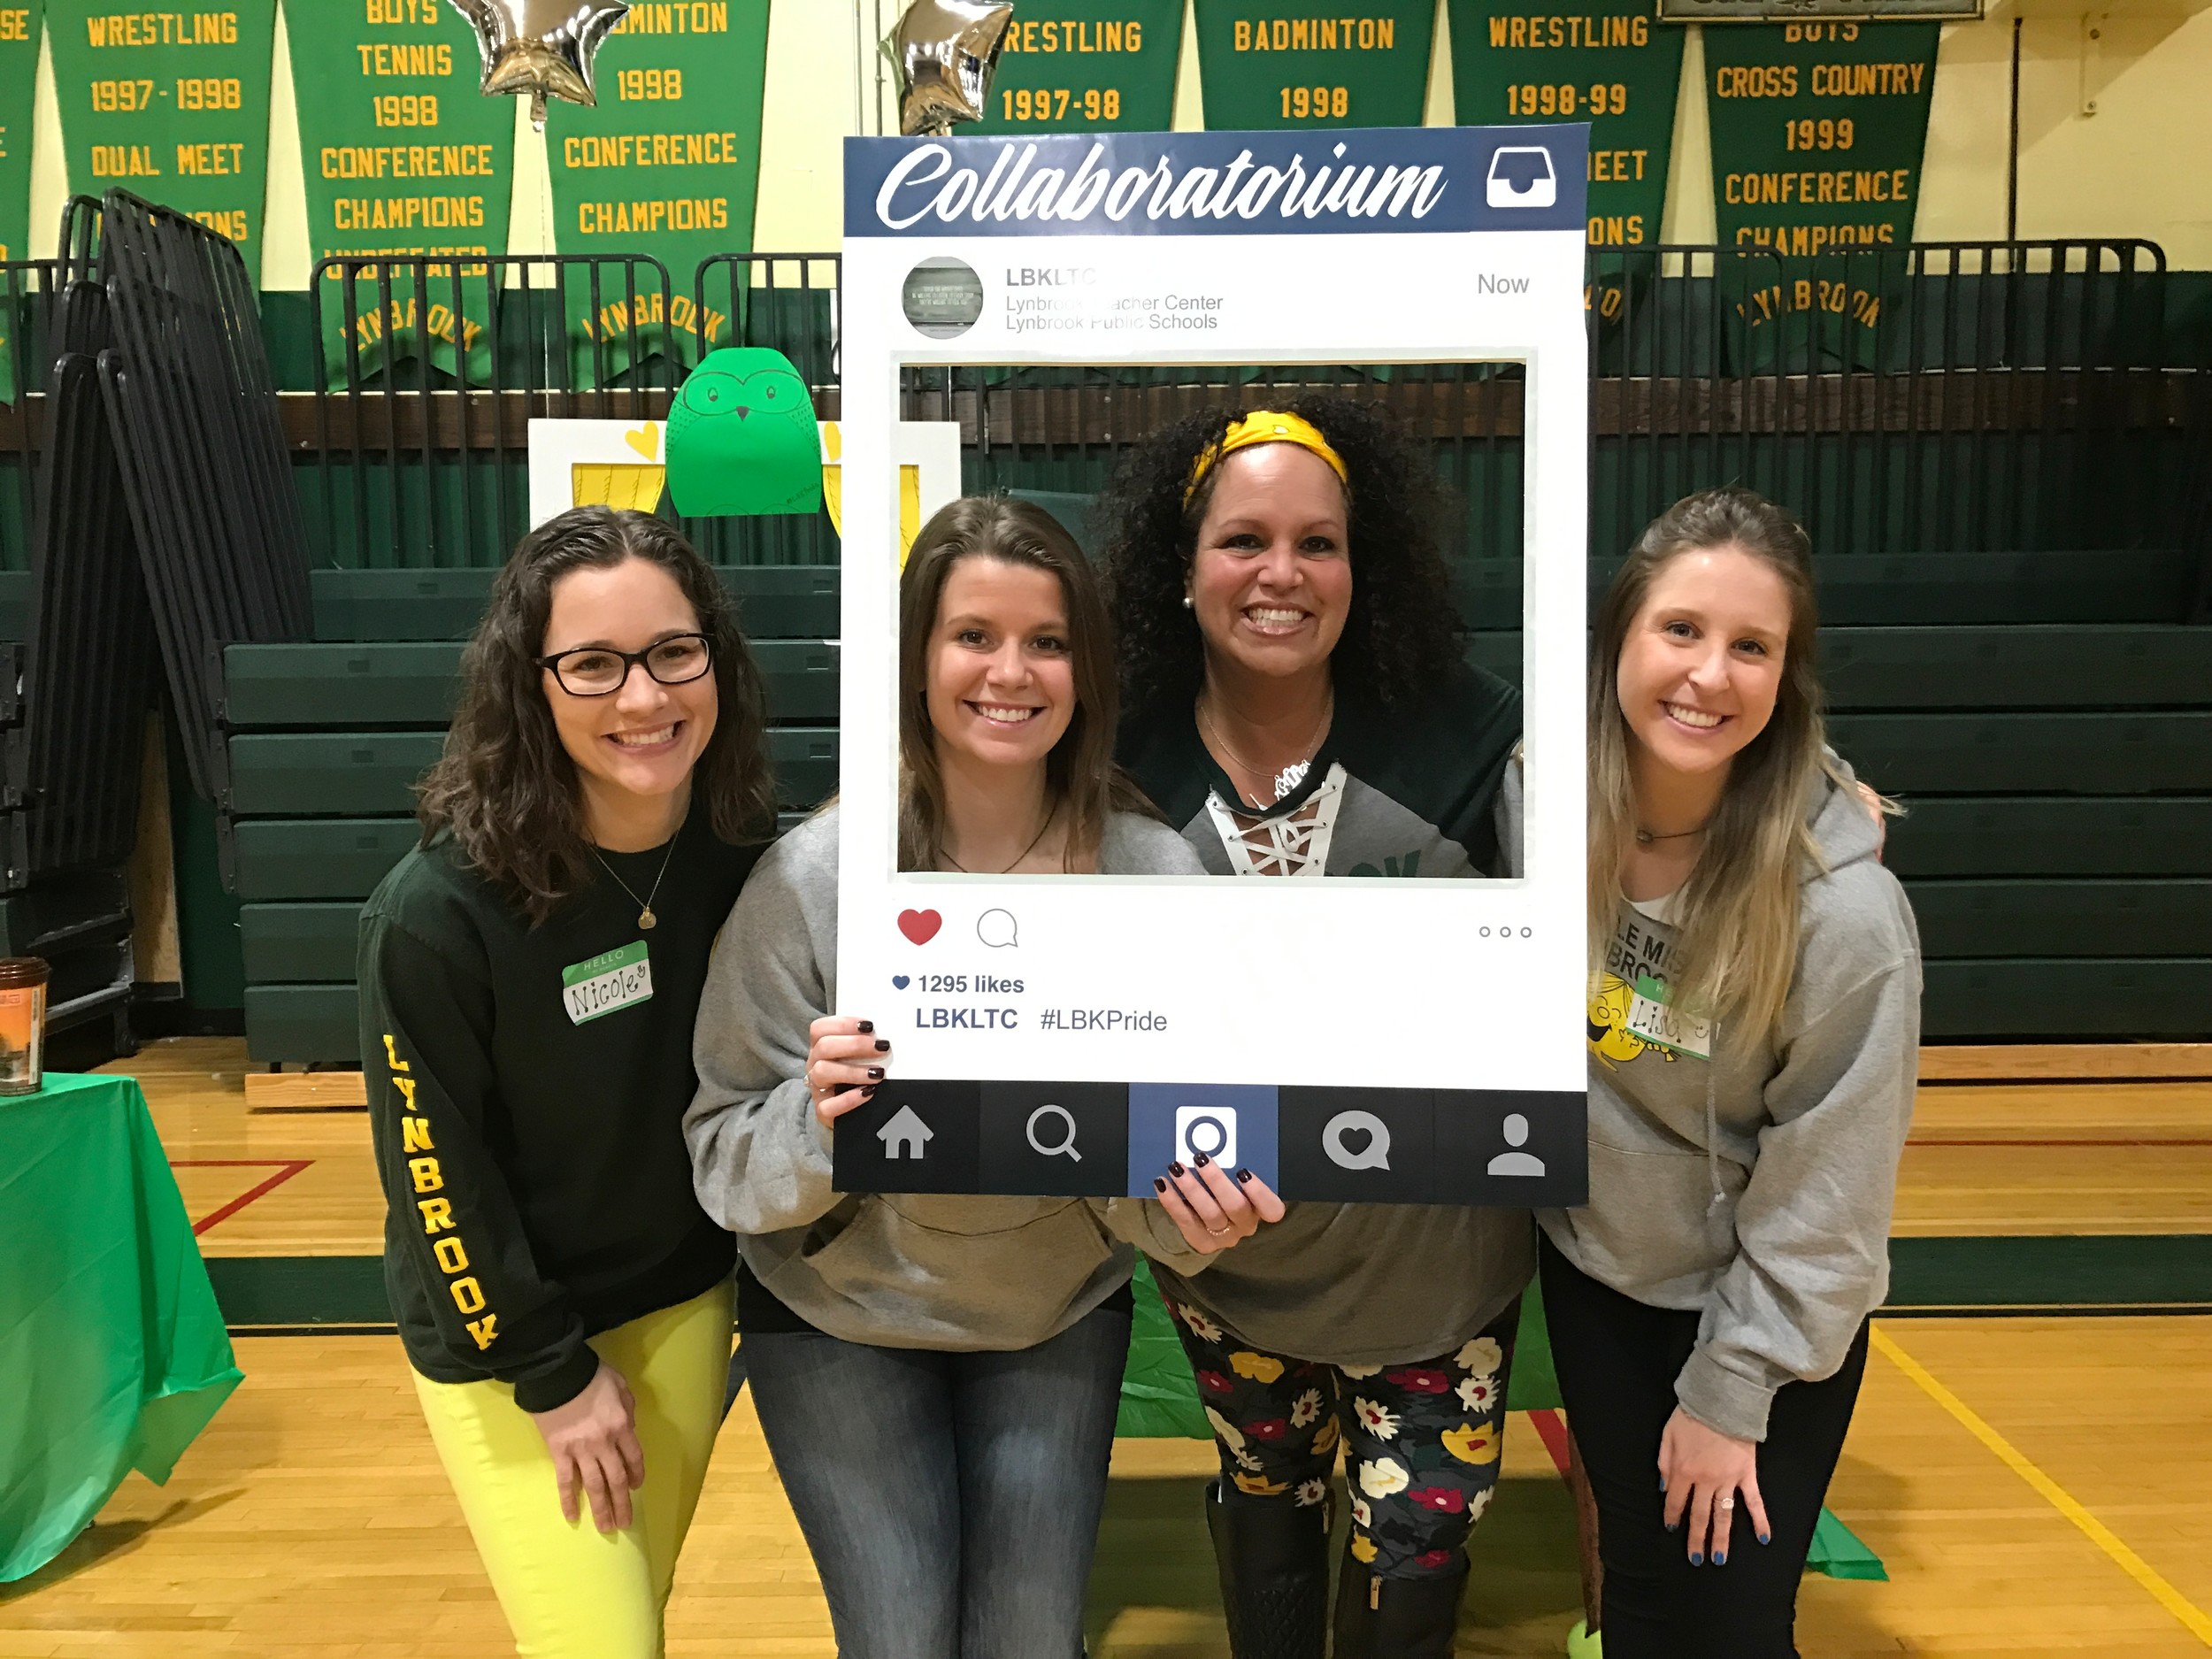 Policy board members Nicole Sherry, left, and Jessica Eitingon, Lynbrook Teachers Center Director Mary Kirby and policy board member Lisa Nulty had some fun with Instagram at the “Unconference Day” meeting.